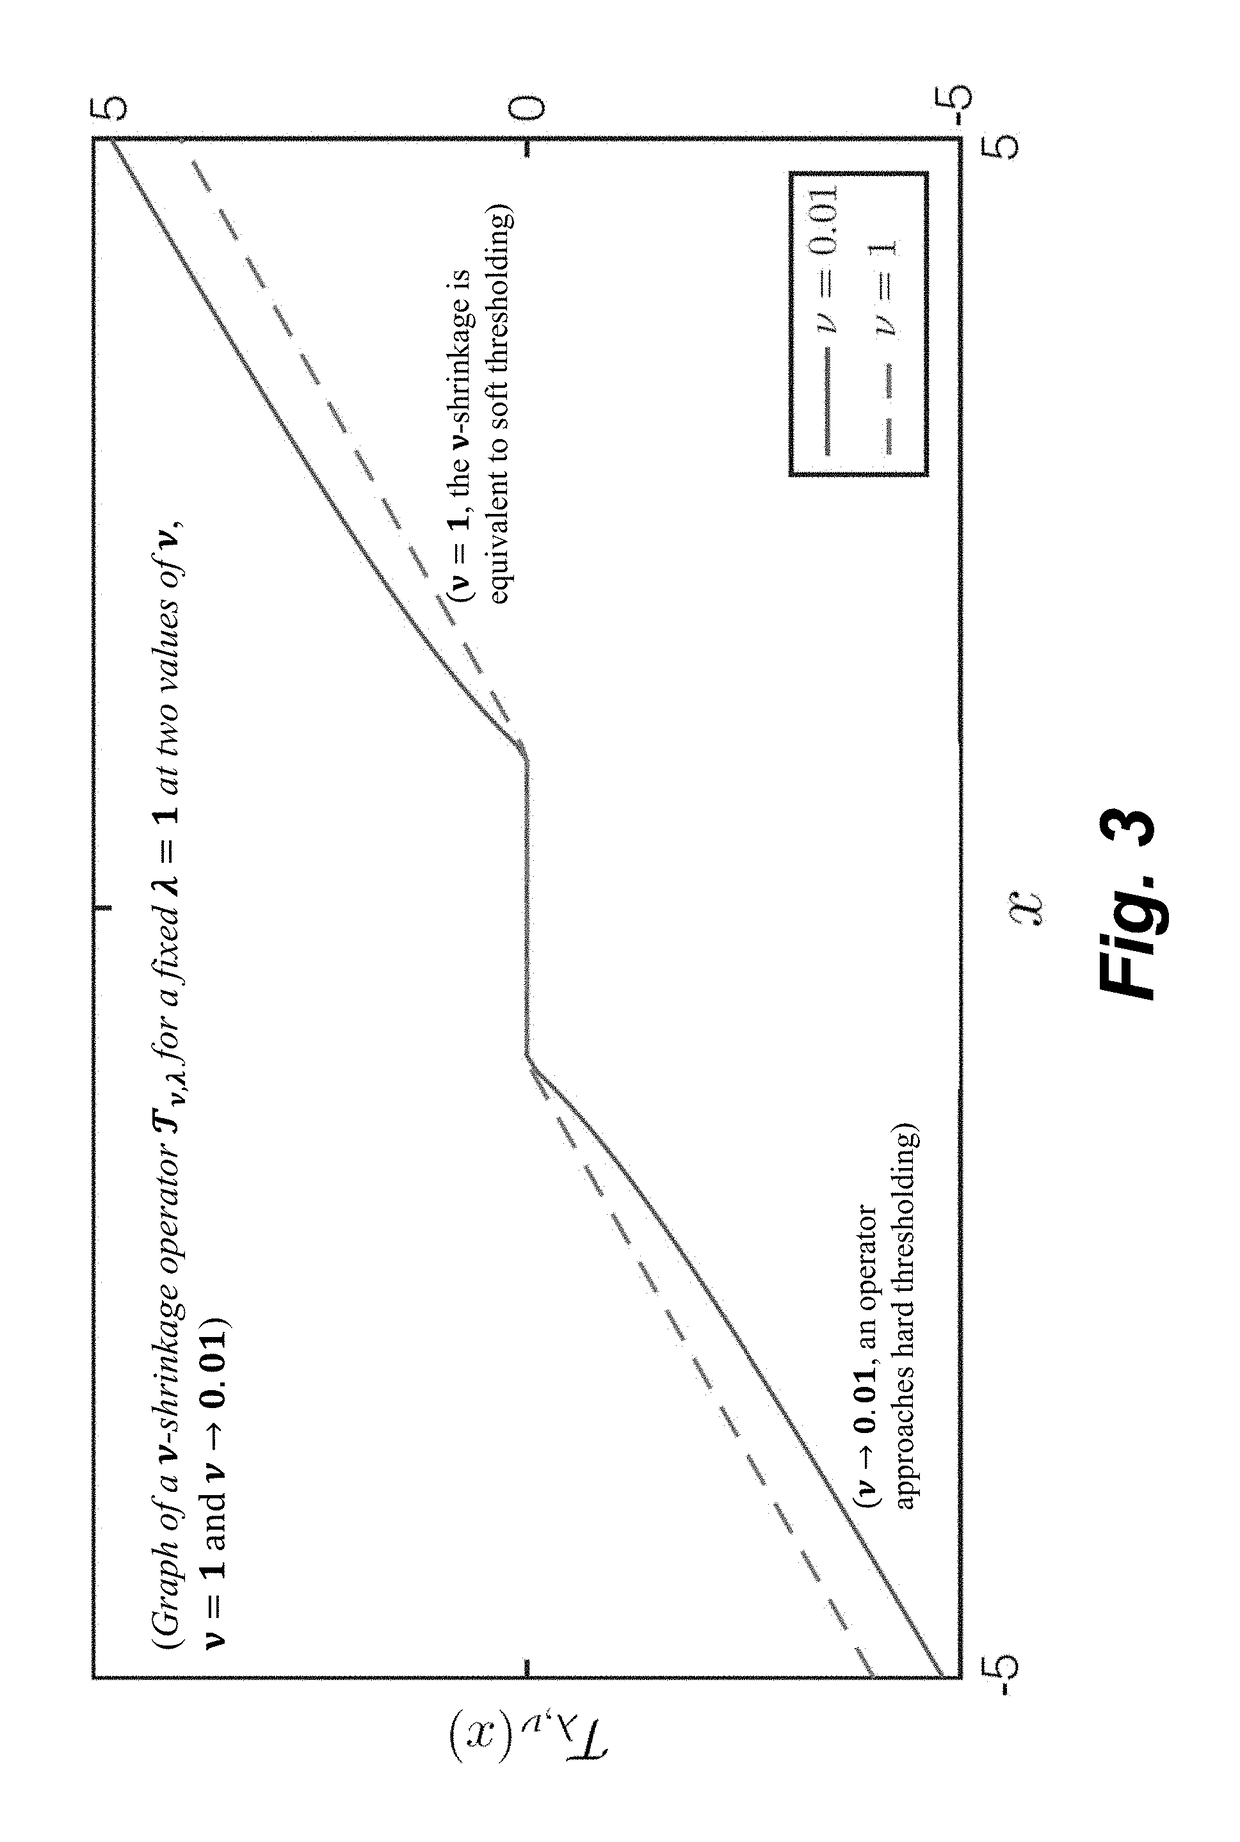 Method and system for motion adaptive fusion of optical images and depth maps acquired by cameras and depth sensors